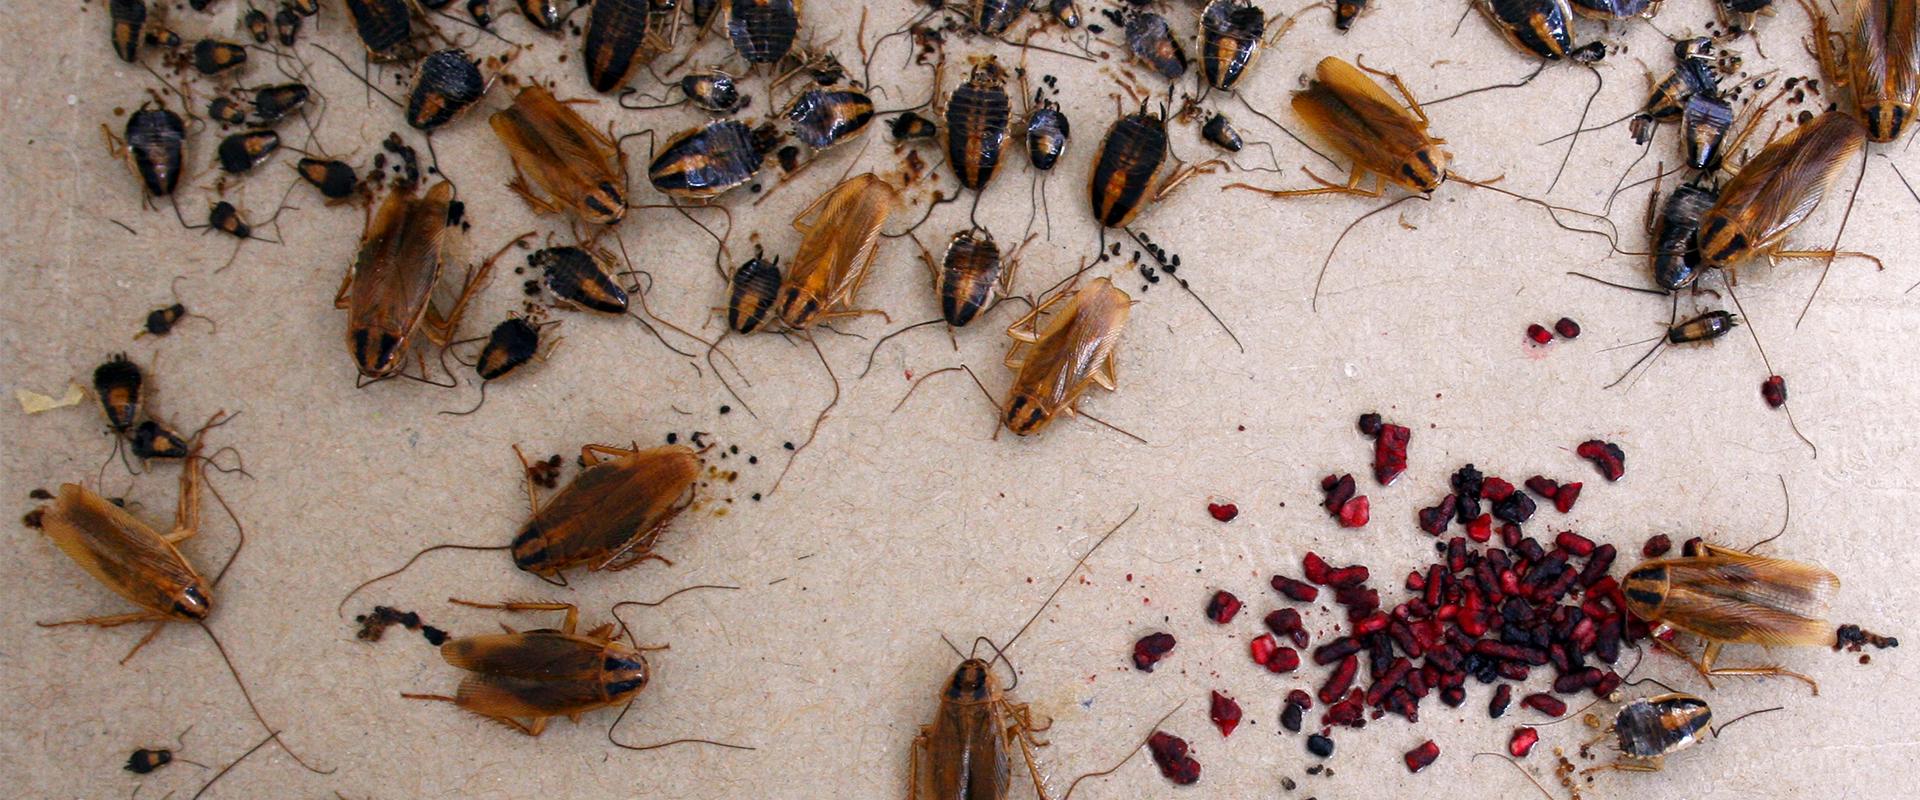 cockroaches on a glue board